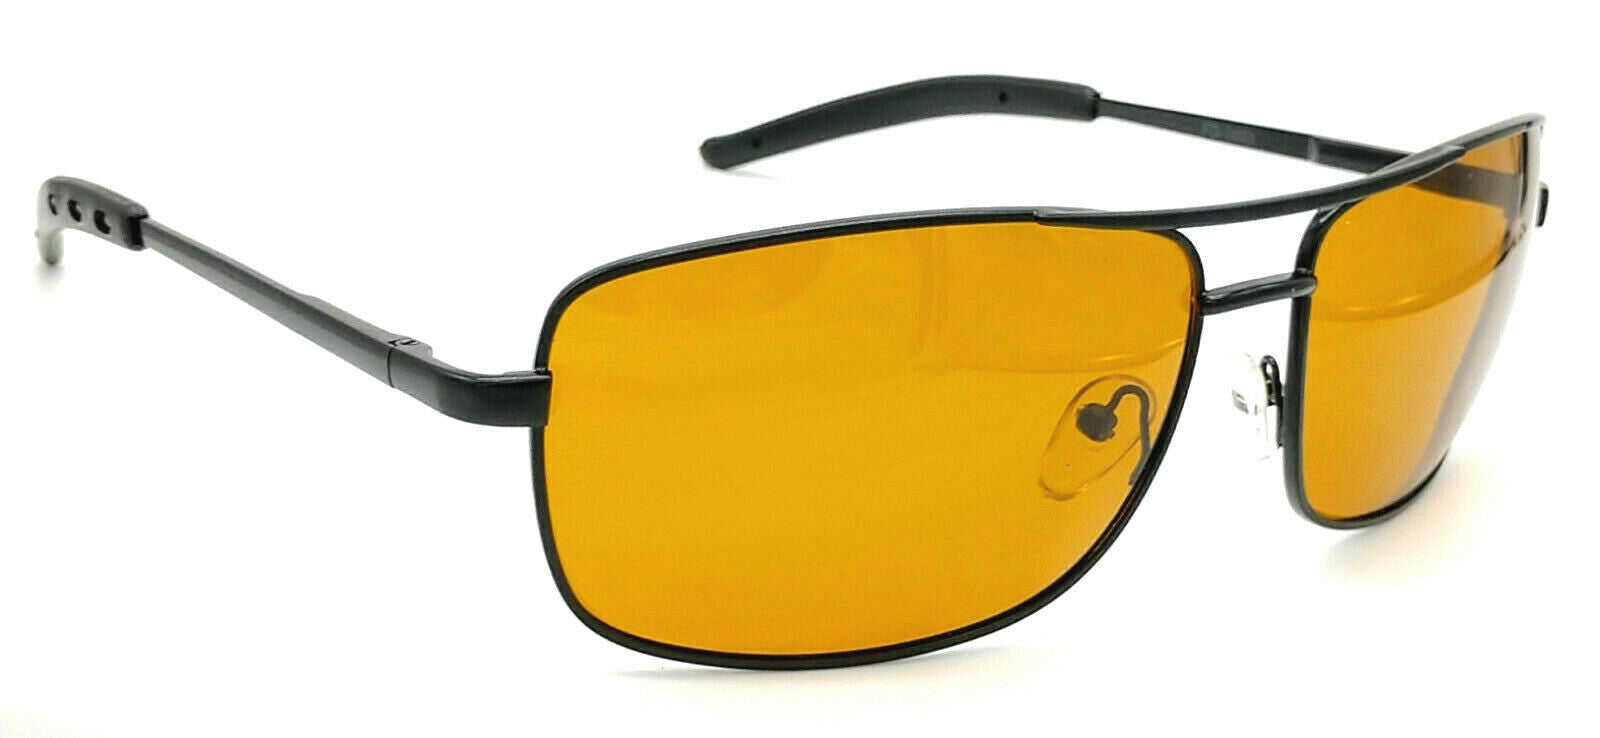 FLY-DEF High-Definition Polarized Fishing sunglasses Gold Lens Metal Rectangle Aviator